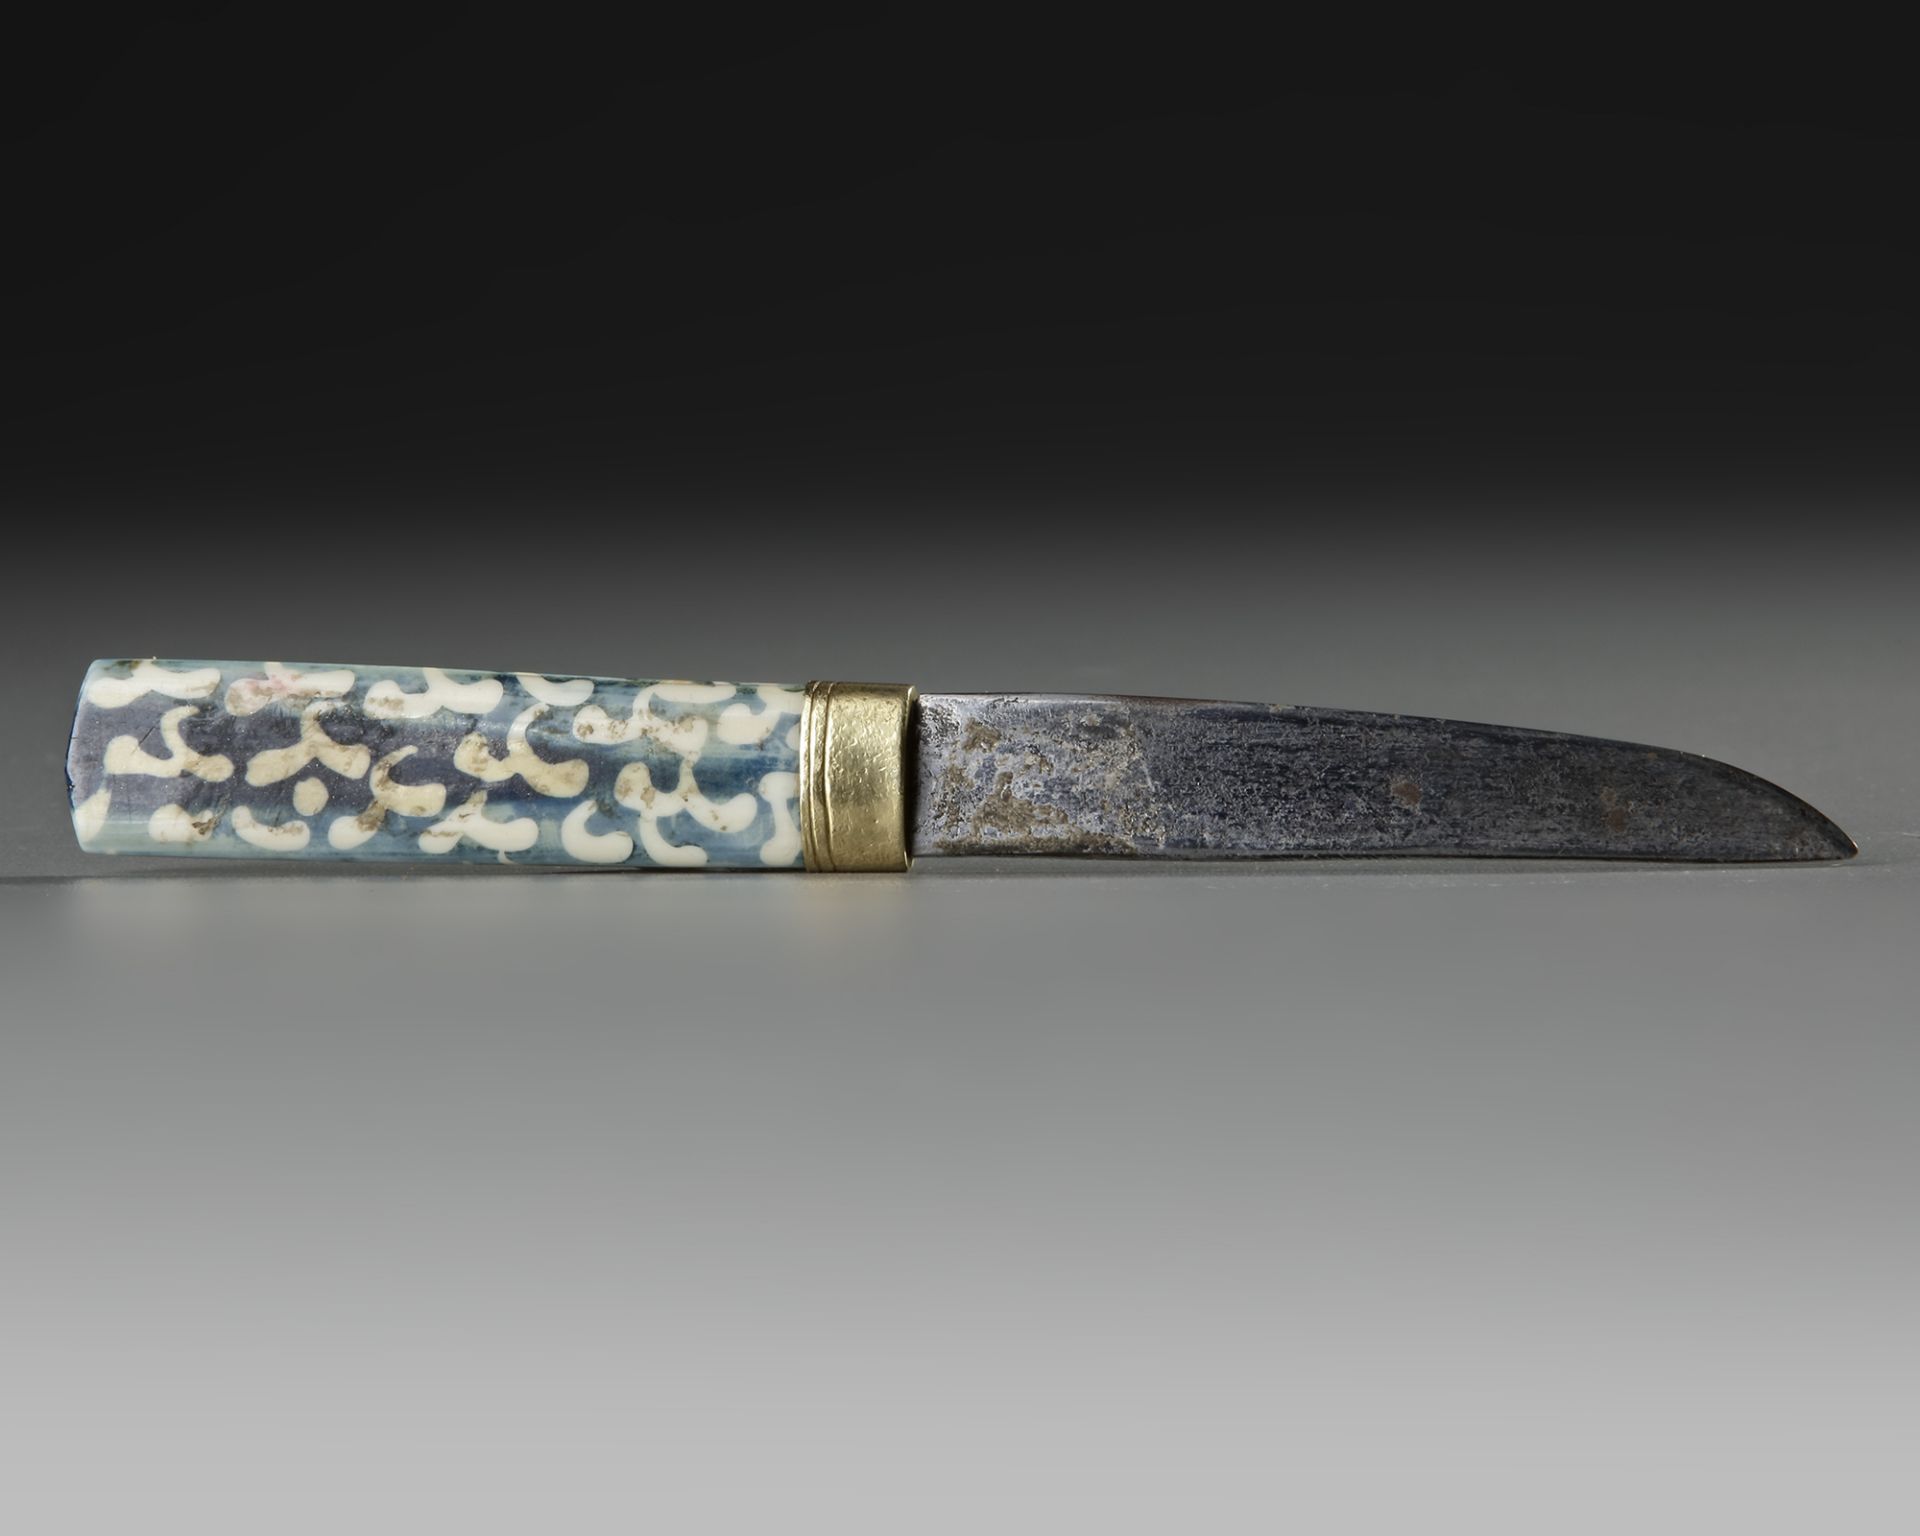 A SMALL INSCRIBED KNIFE, LATE TIMURID, 15TH-16TH CENTURY - Image 11 of 12